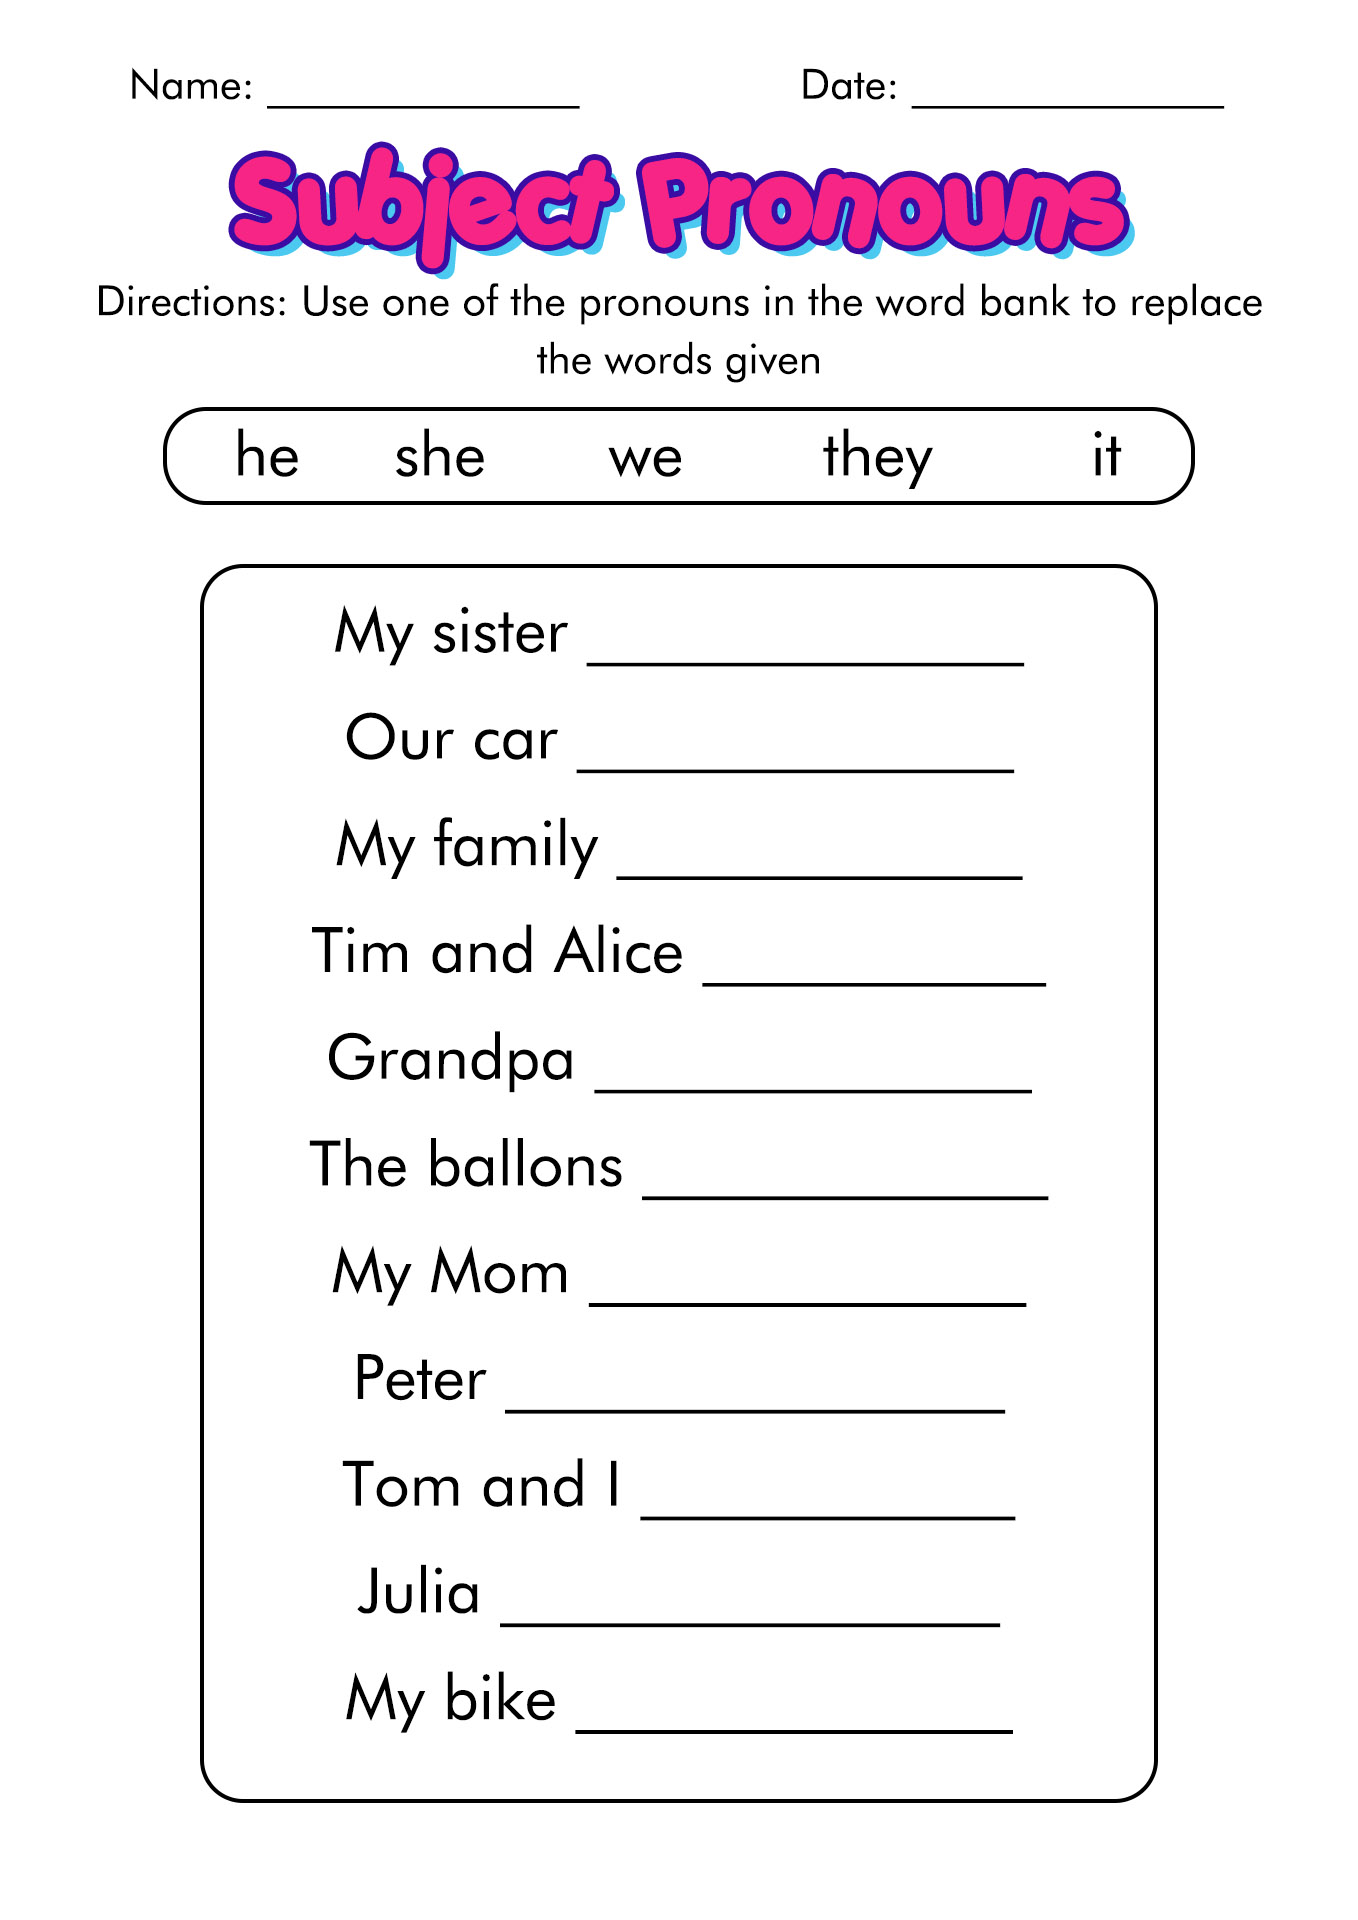 15-best-images-of-pronoun-contractions-worksheets-contraction-worksheets-grade-1-personal